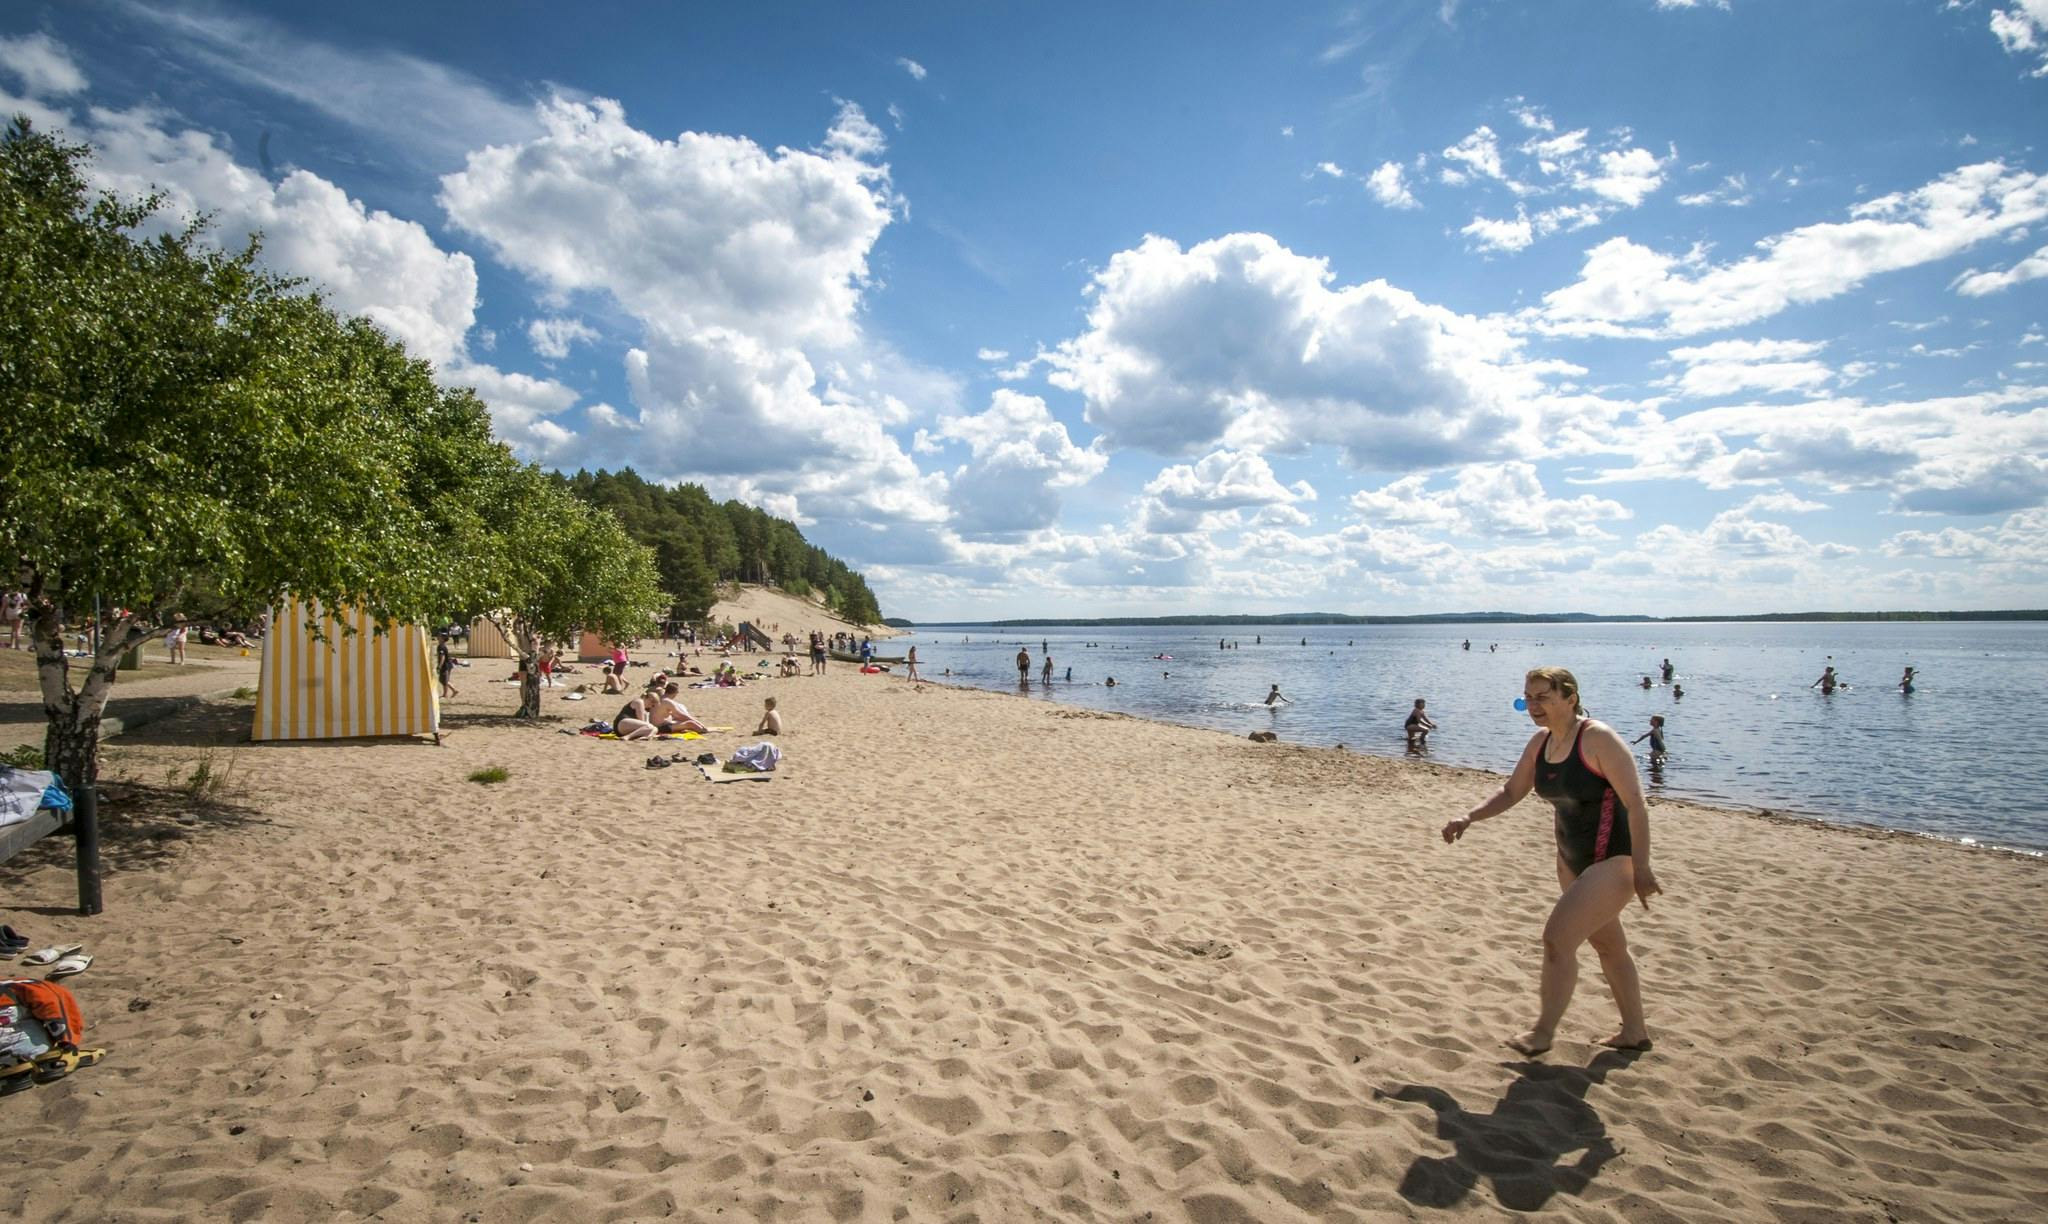 Featured image for “The Beautiful Beaches of Kainuu”